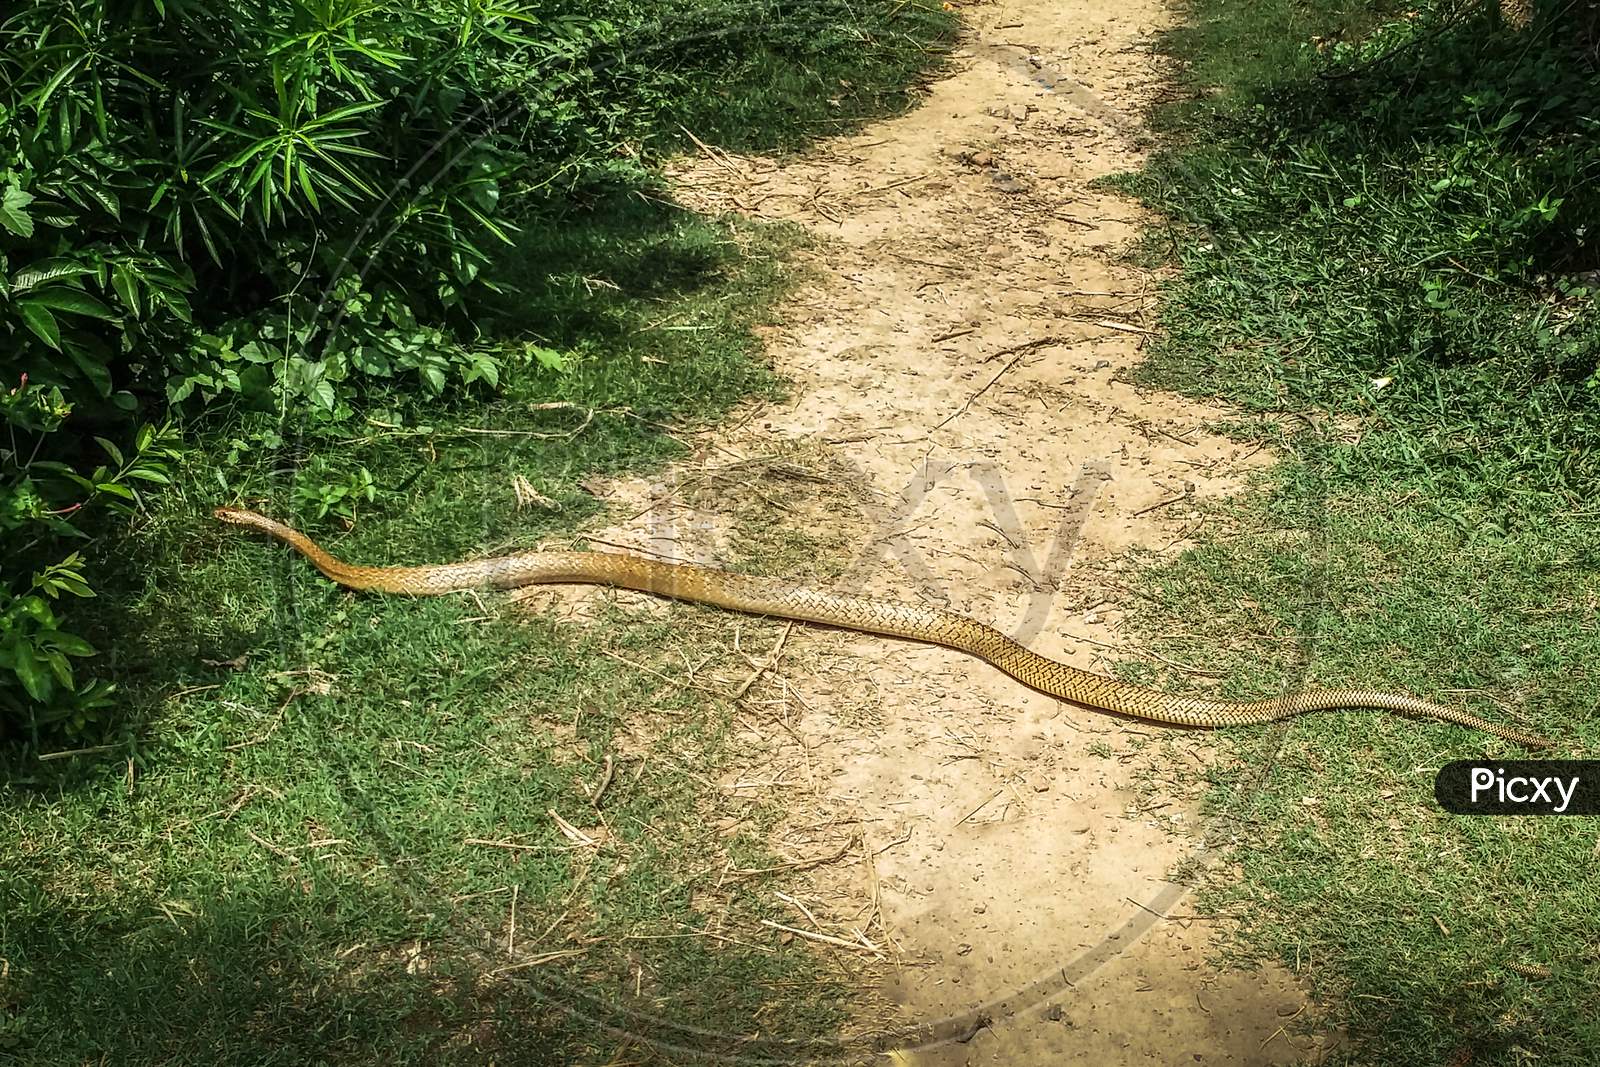 Image of Indian rat snake also known as dhaman